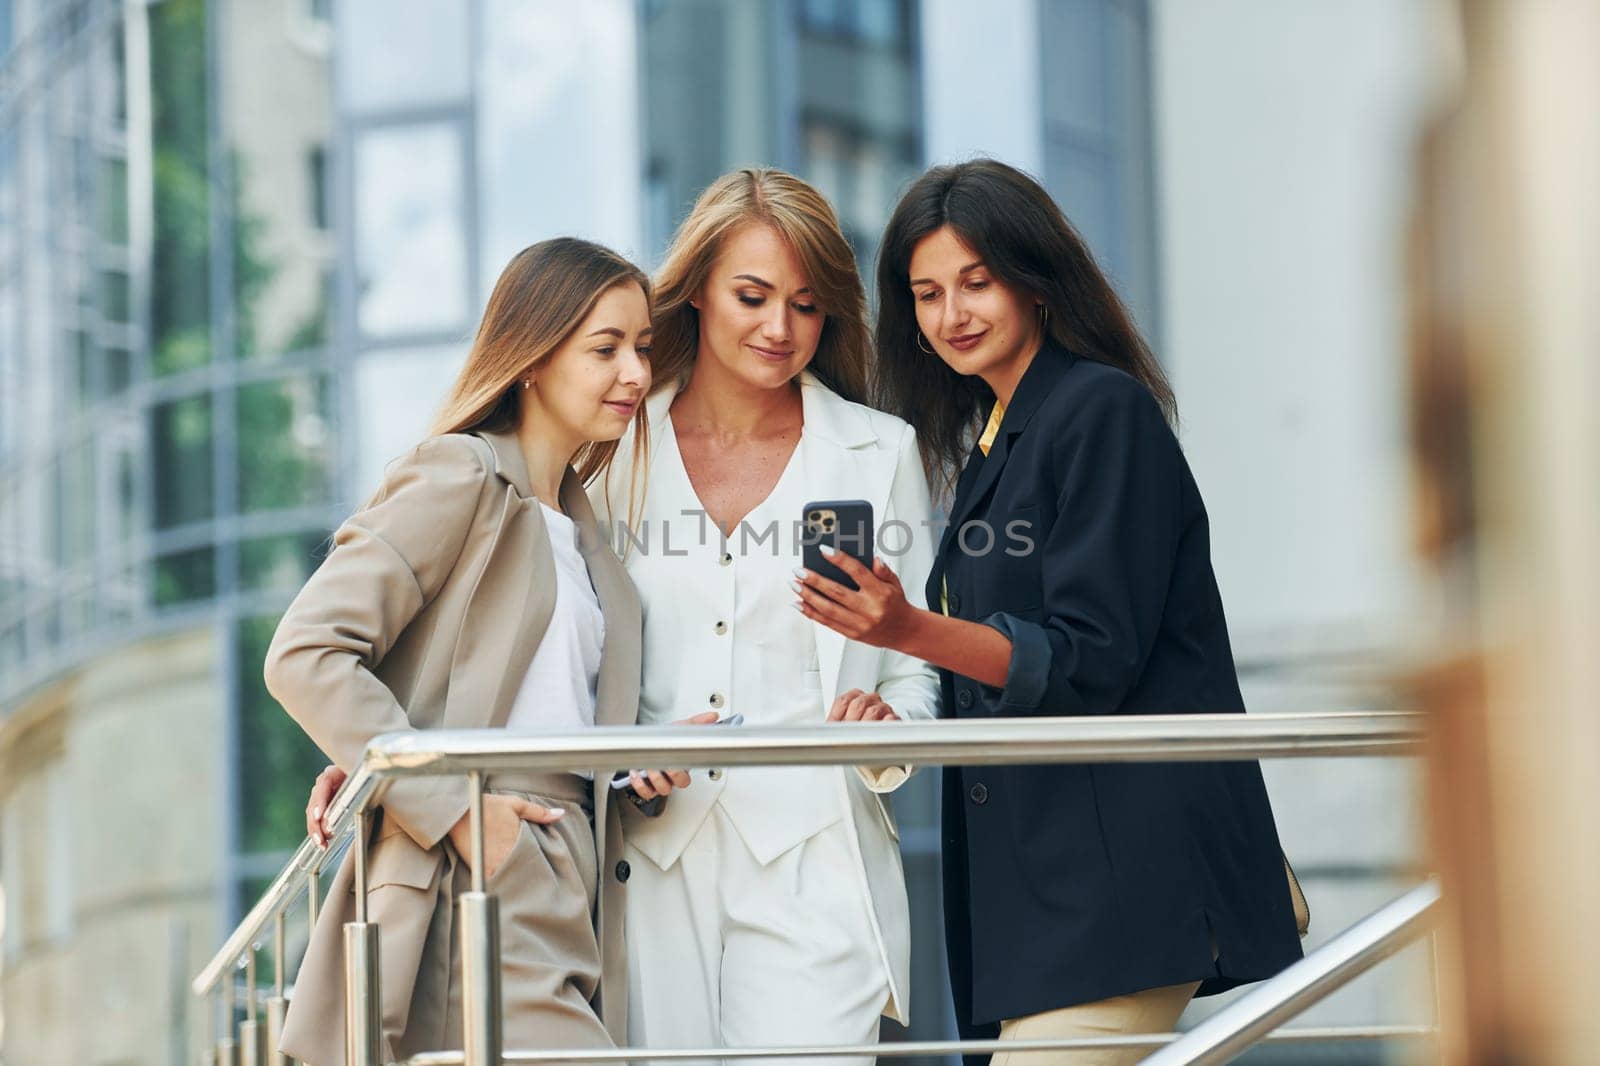 Using phone. Women in formal wear is outdoors in the city together by Standret